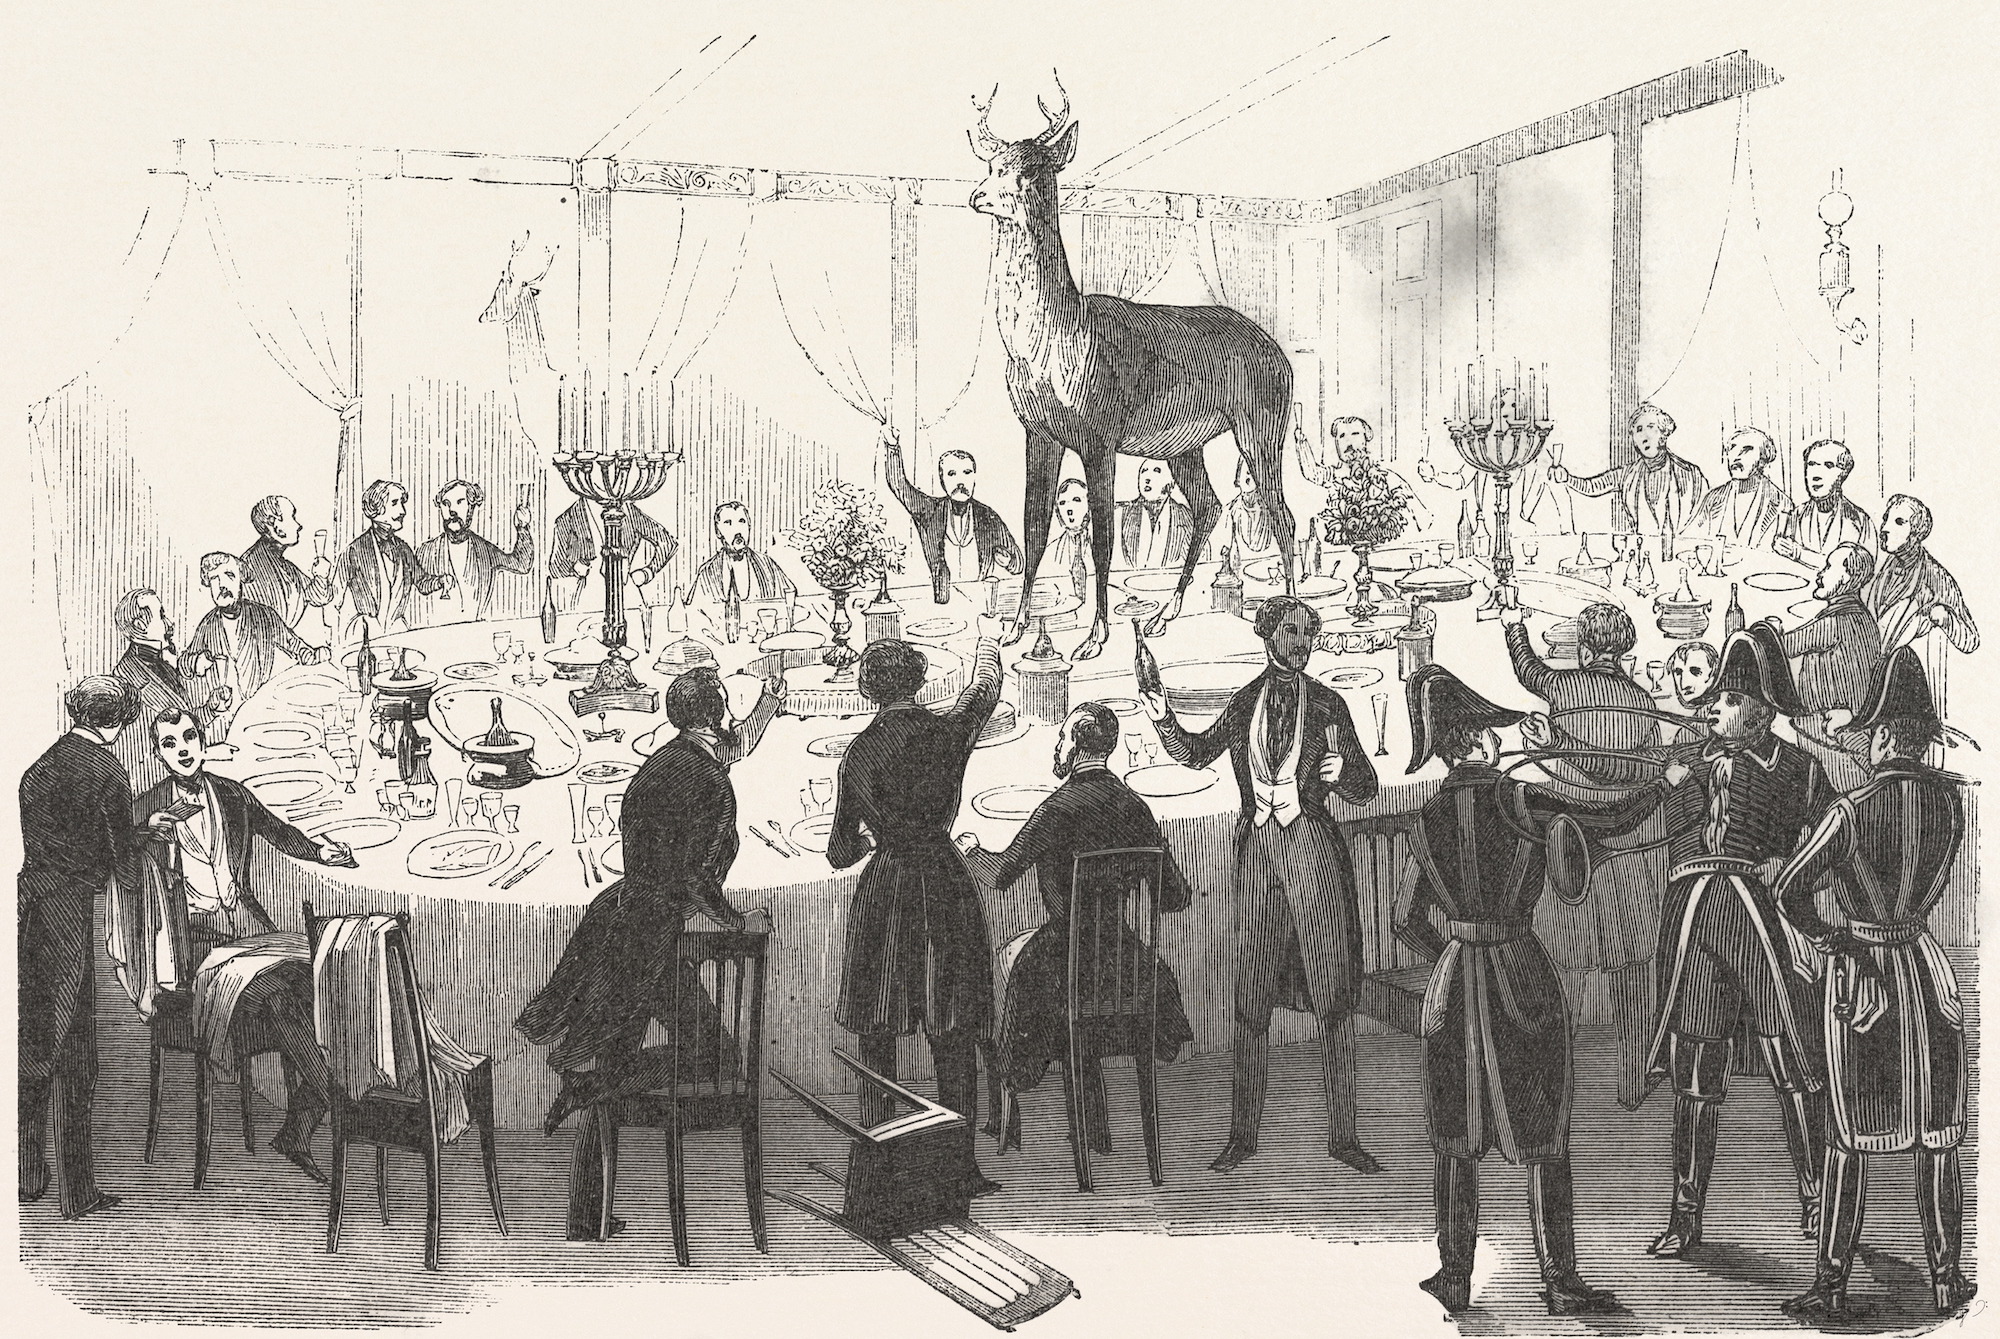 19th Century Dinner Party After The Hunt. Engraving 1800s. (Photo by: Universal History Archive/Universal Images Group via Getty Images)